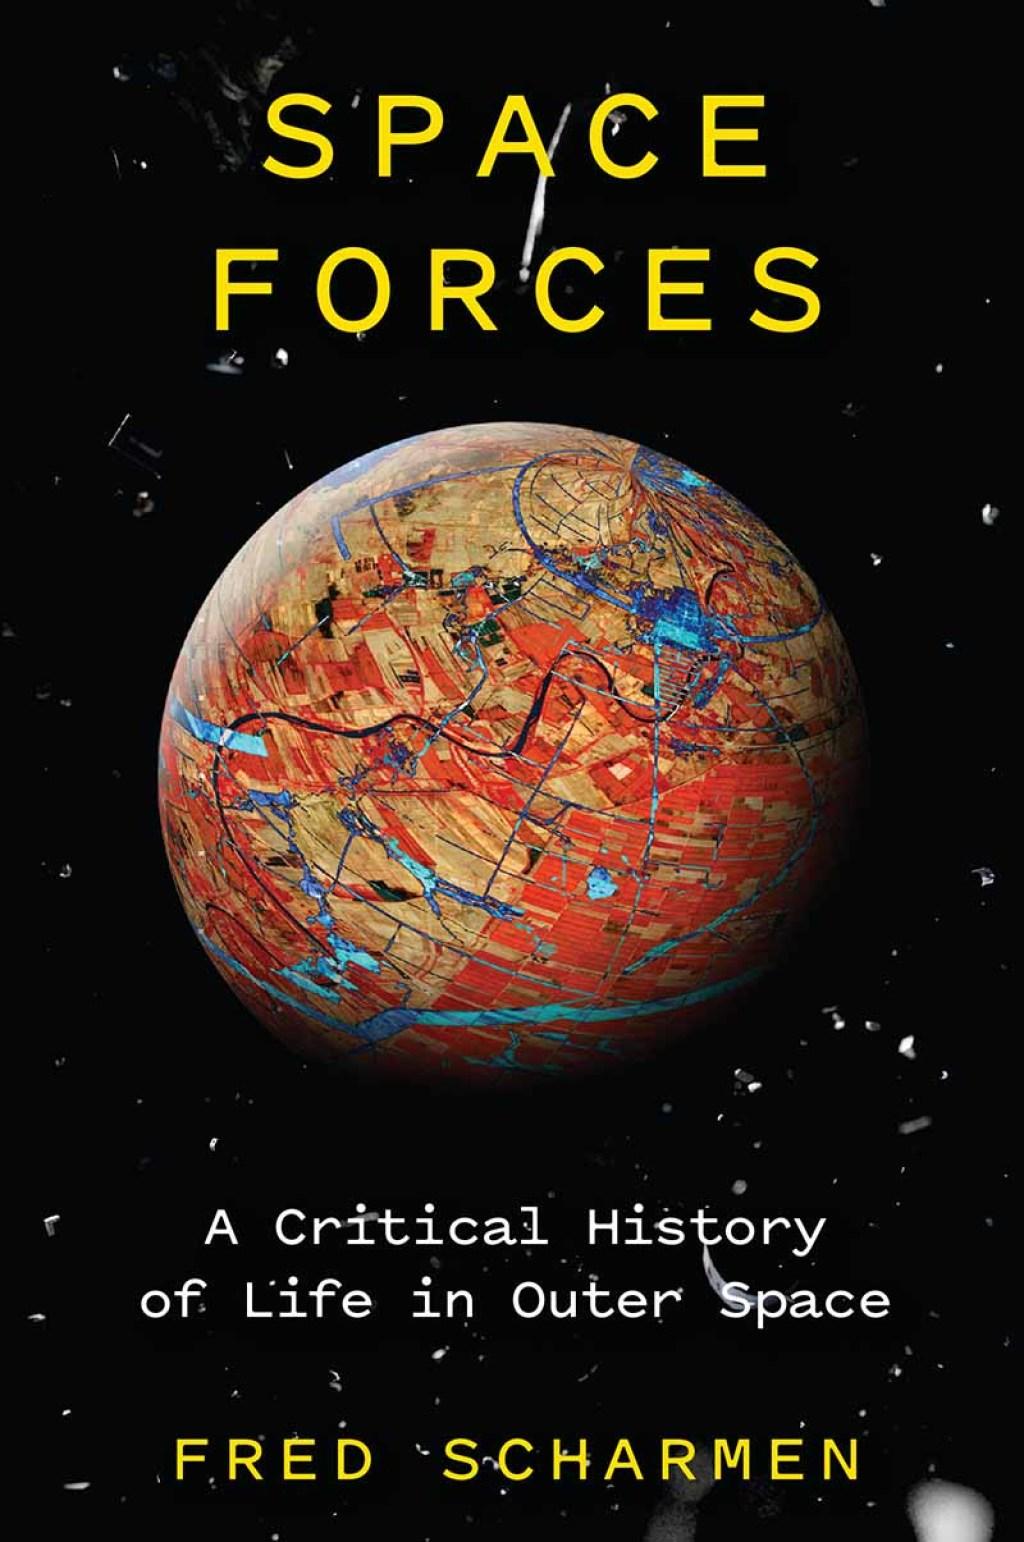 Space Forces - by Fred Scharmen (Hardcover)